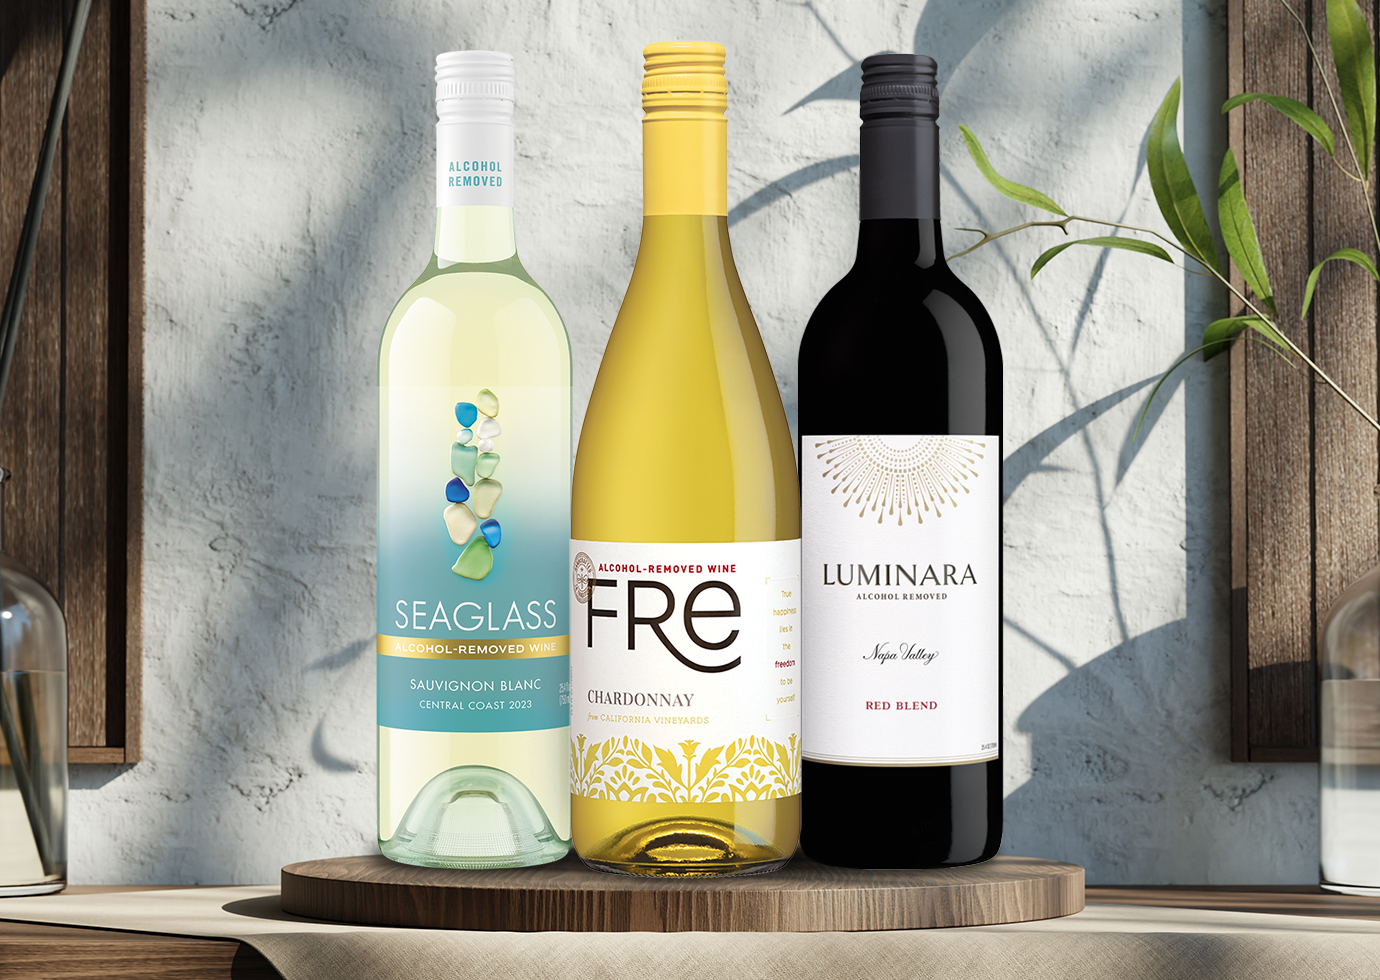 bottles of SEAGLASS alcohol-removed sauvignon blanc, FRE alcohol-removed chardonnay, Luminara alcohol-removed red blend on a wooden board on a counter